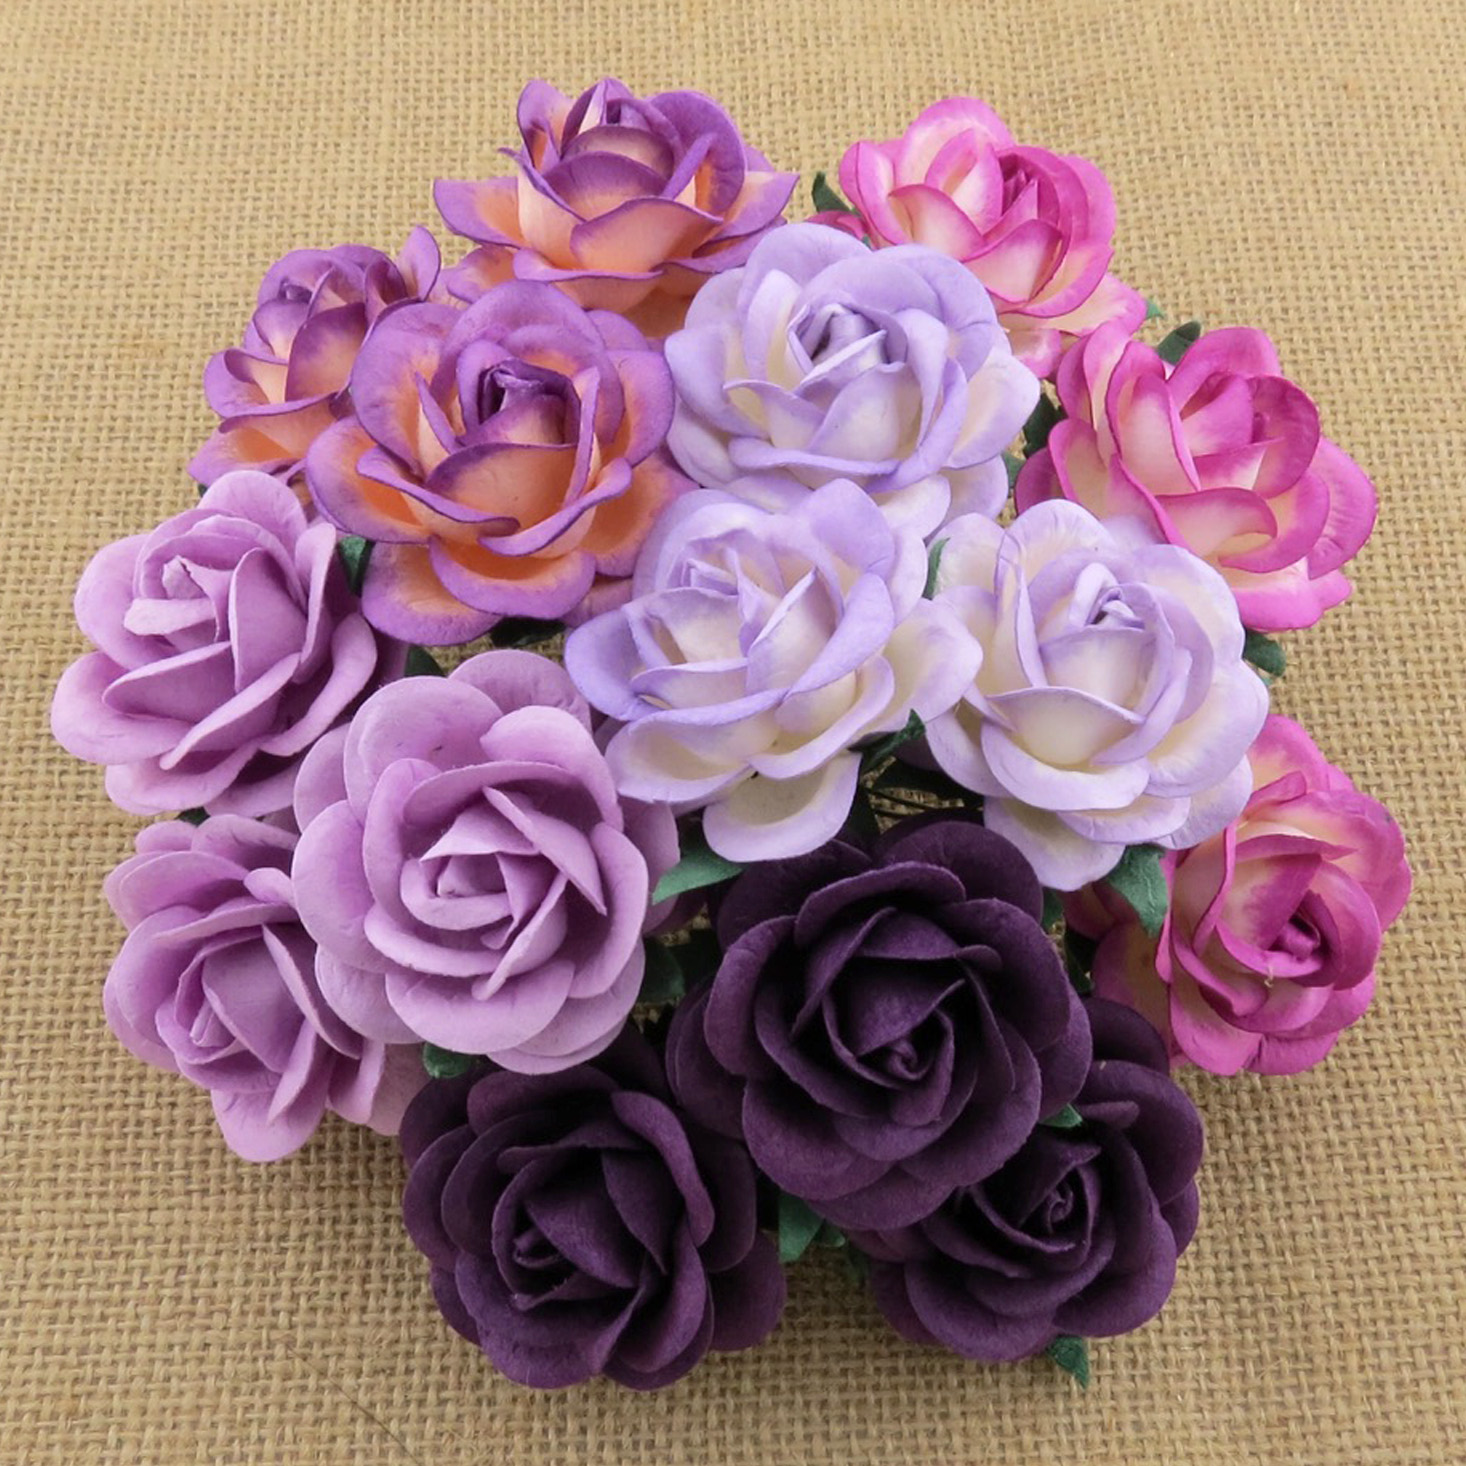 50 MIXED PURPLE/LILAC MULBERRY PAPER TRELLIS ROSES - 5 COLOR